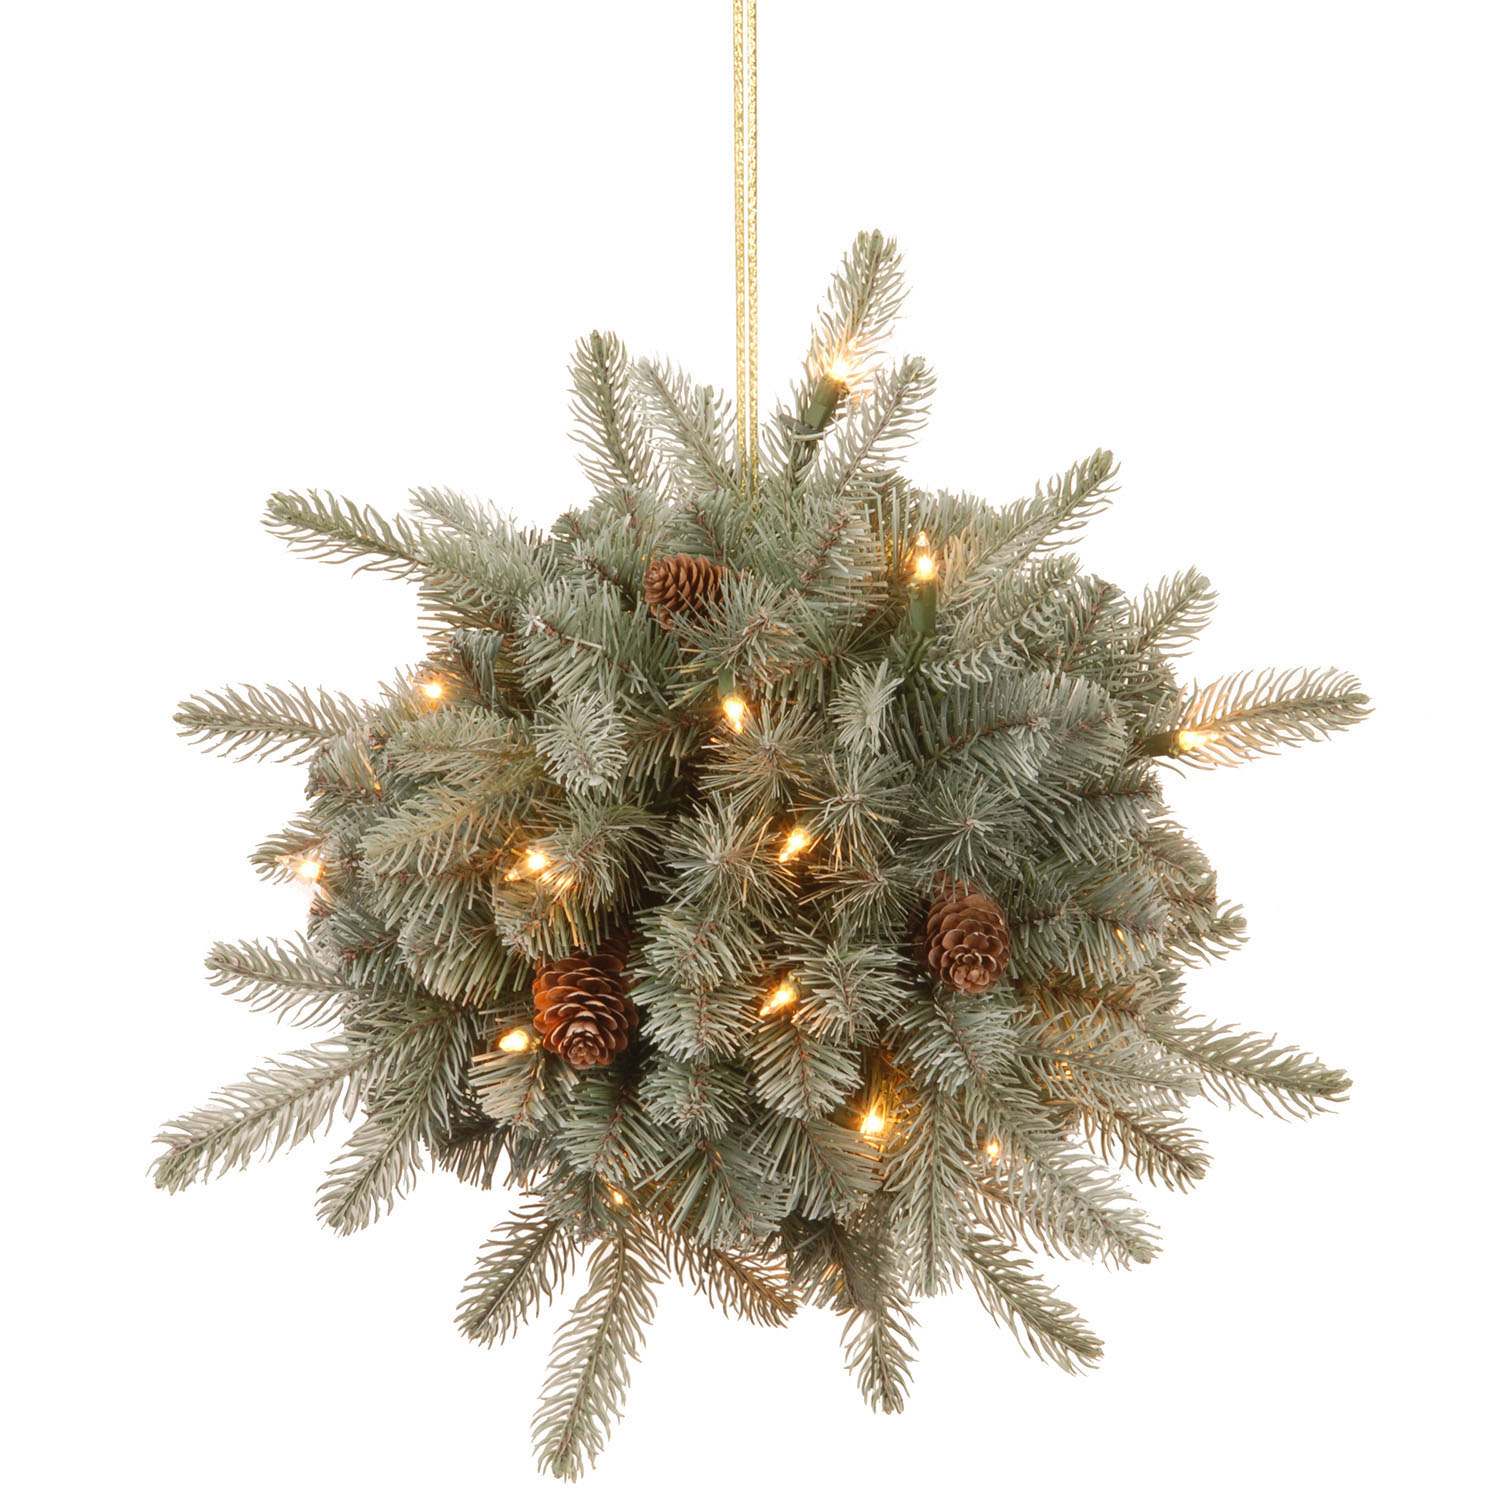 12 Inch Pe/pvc Frosted Artic Spruce Kissing Ball: Battery/timer Operated Leds